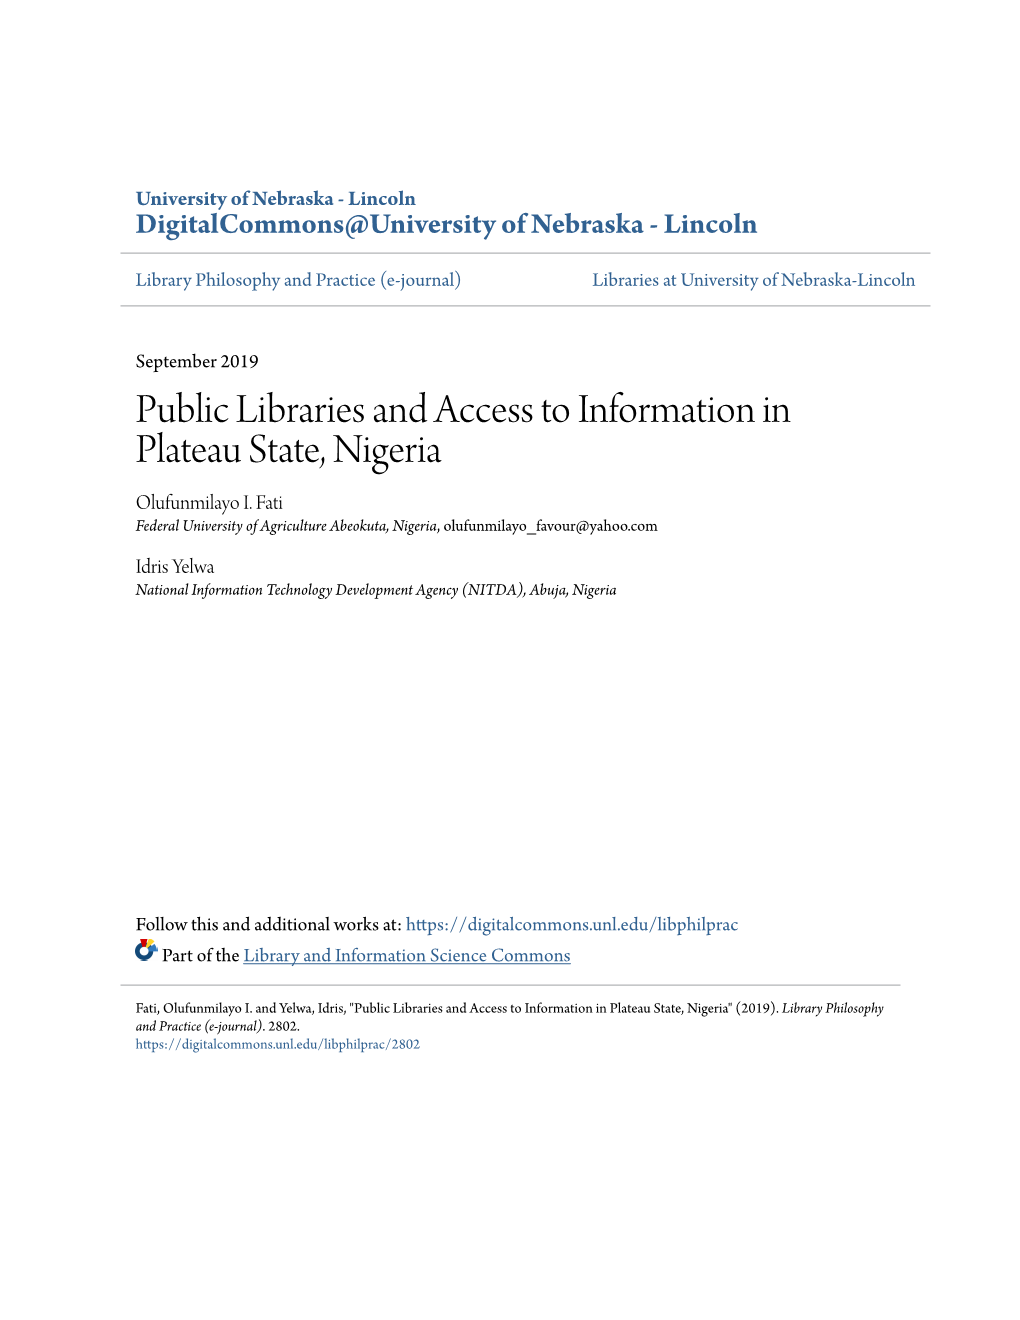 Public Libraries and Access to Information in Plateau State, Nigeria Olufunmilayo I